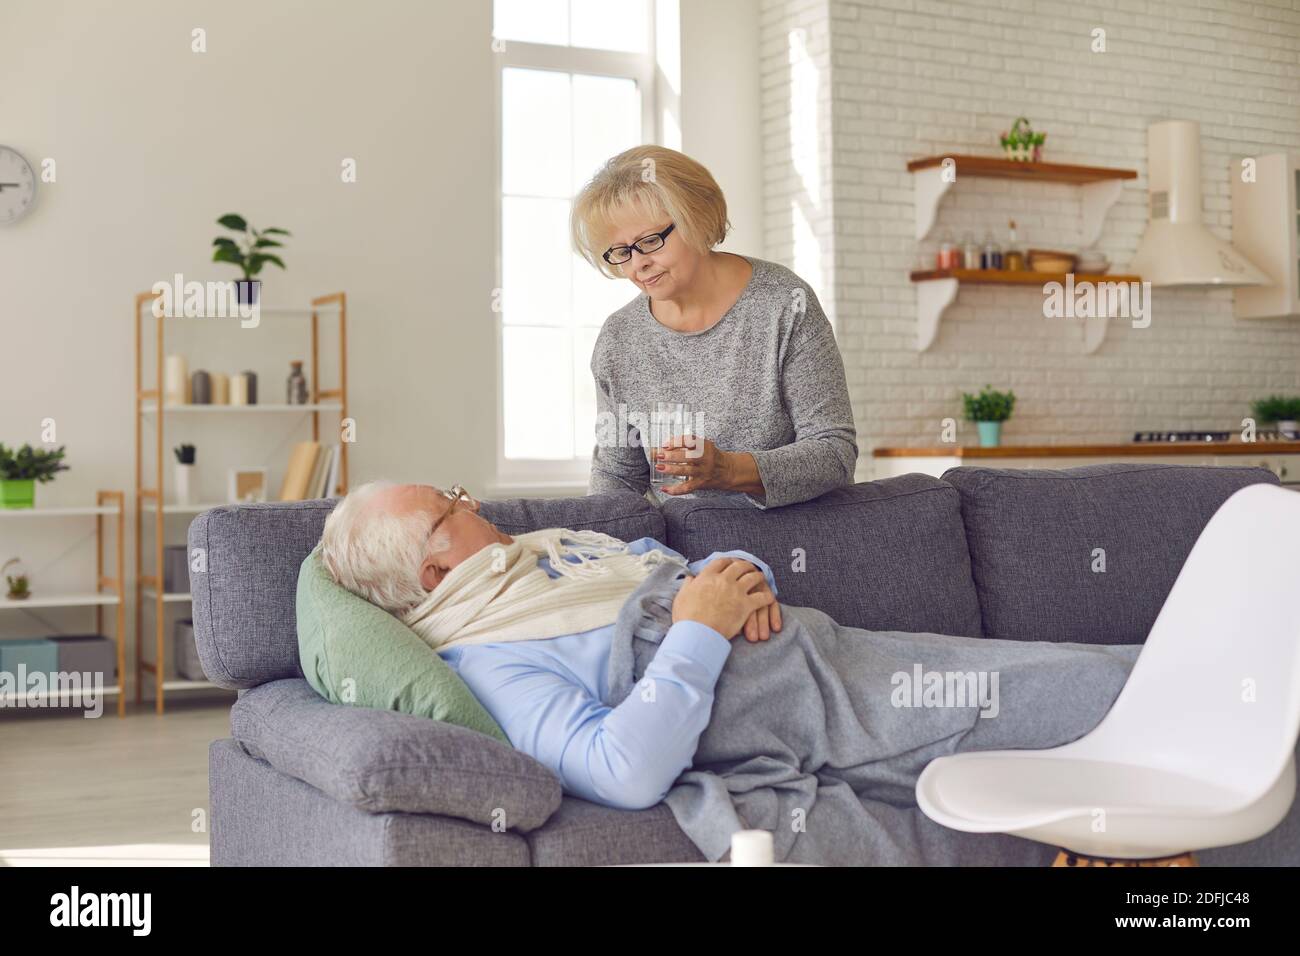 Senior woman grandmother taking care and bringing water to ill husband feeling fever Stock Photo